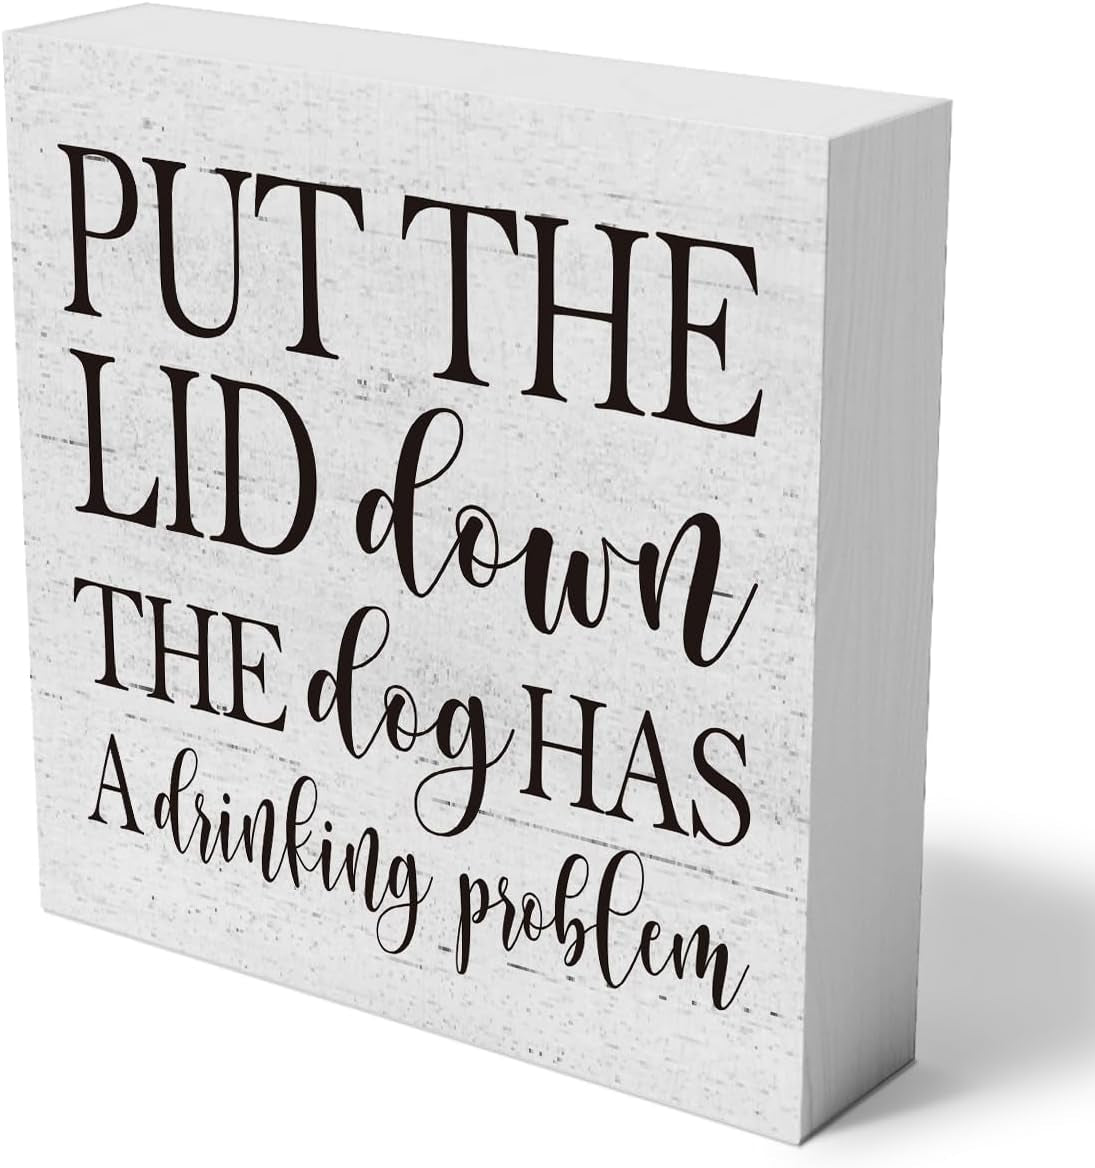 Put the Lid down the Dog Has a Drinking Problem Wooden Box Sign Decorative Funny Bathroom Wood Box Sign Home Decor Rustic Farmhouse Square Desk Decor Sign for Shelf 5 X 5 Inches